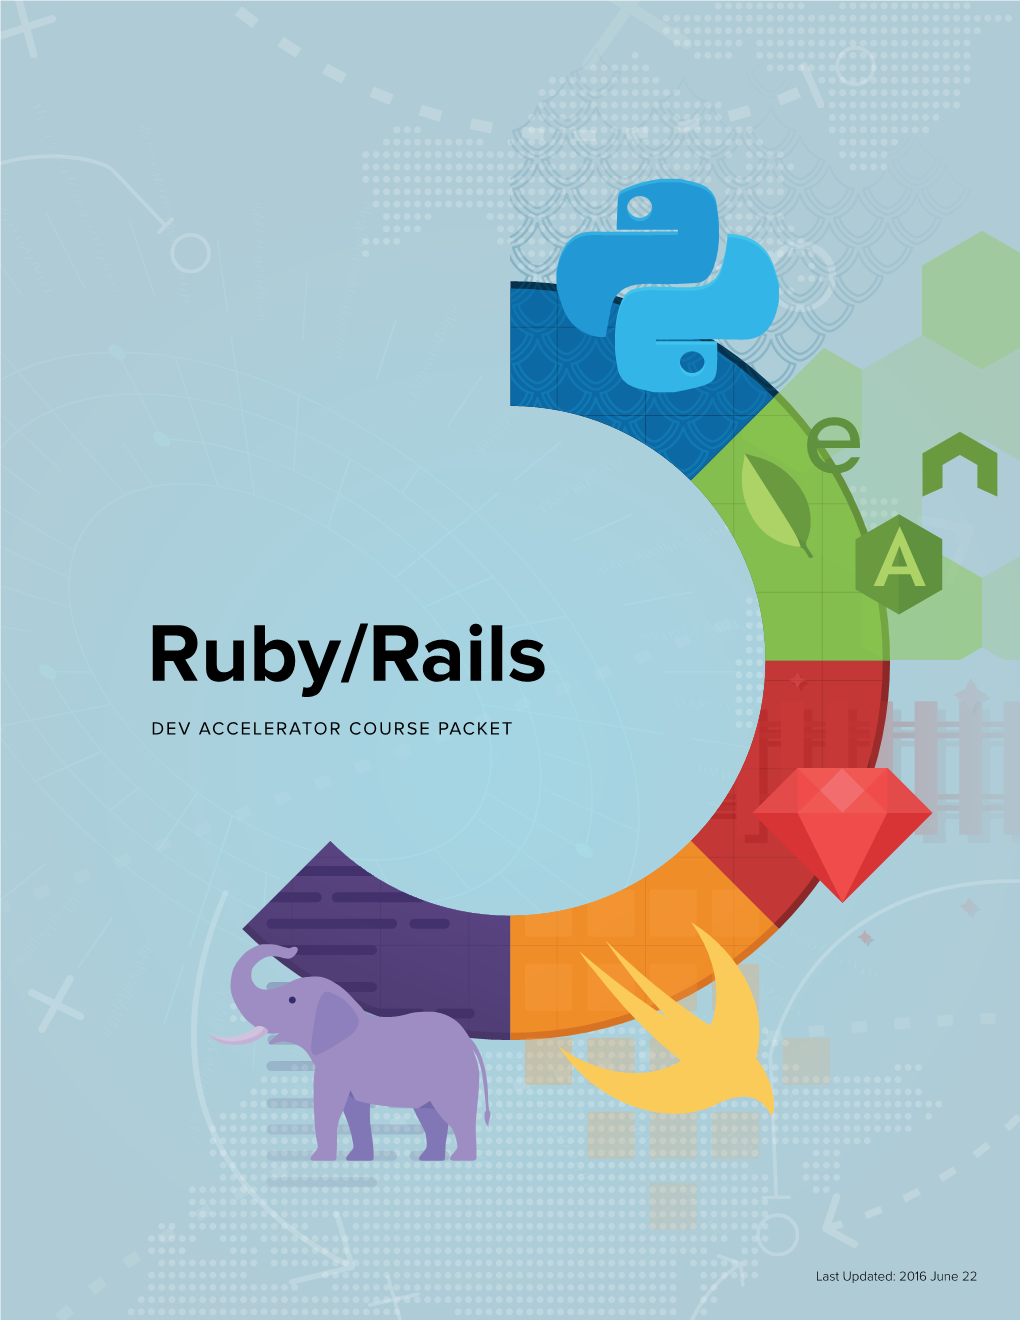 Ruby/Rails DEV ACCELERATOR COURSE PACKET